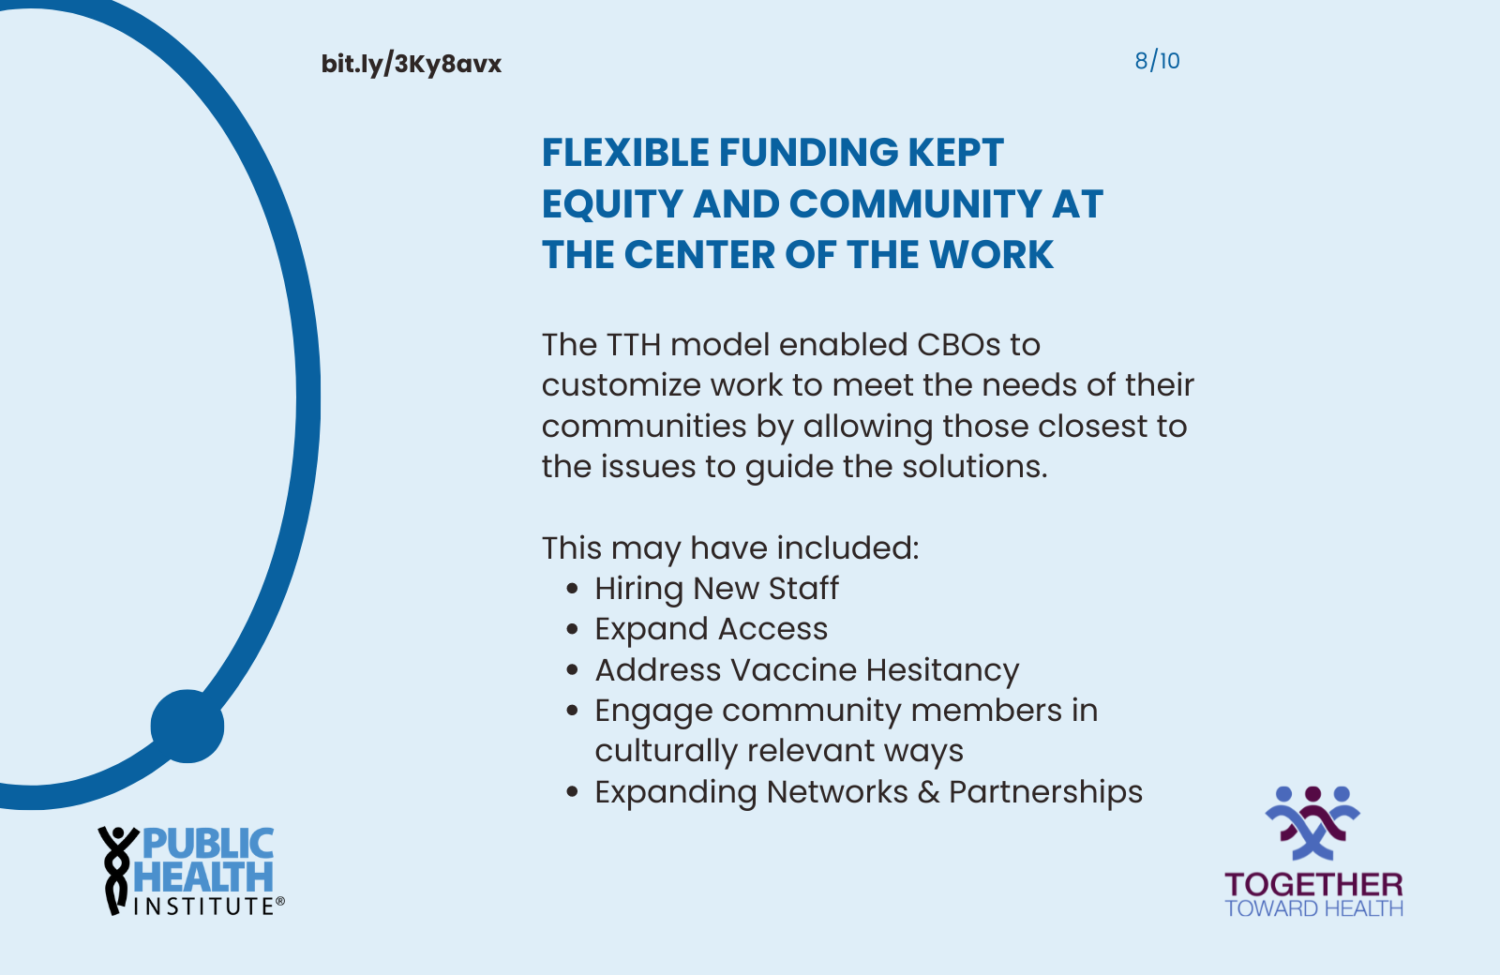 The TTH model enabled CBOs to customize work to meet the needs of their communities by allowing those closest to the issues to guide the solutions.